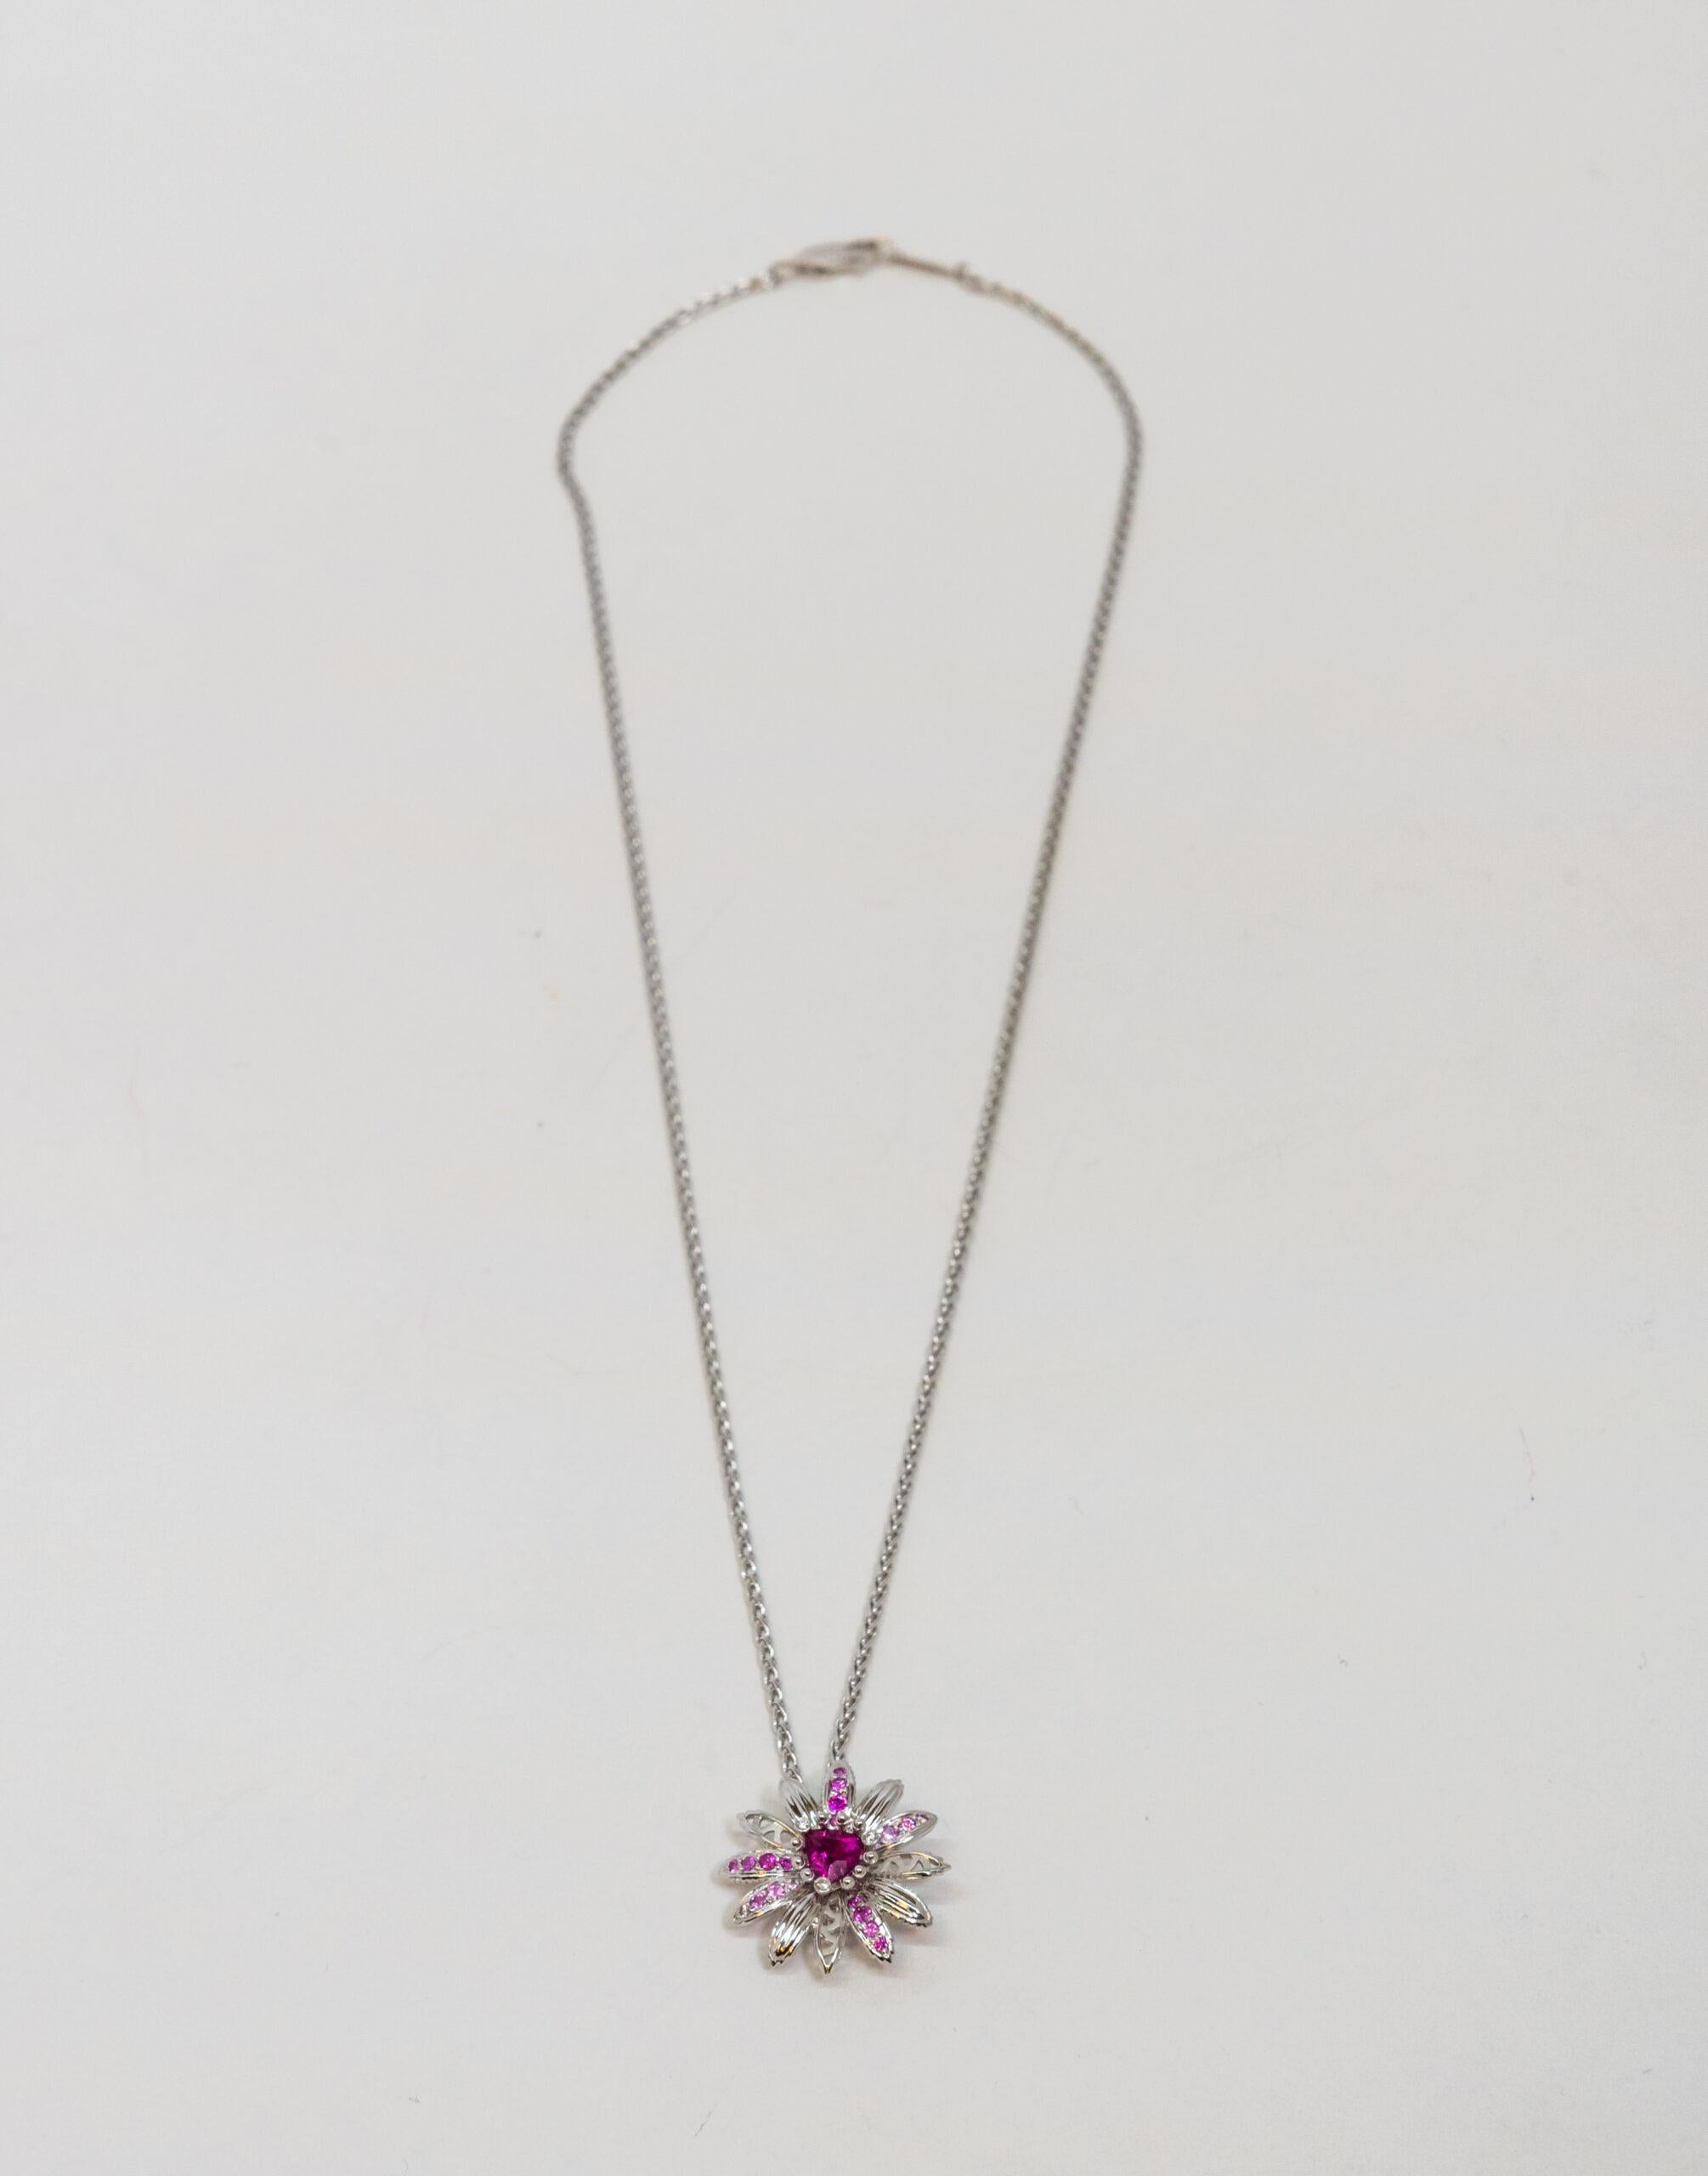 18K White Gold pendant. 18K White Gold cable chain with lobster claw lock. This piece has a flower-shaped pendant which decorated with a pink Sapphire main stone, 3 Diamonds, and 20 small light pink and pink Sapphires on petals.

Chain Length: 22